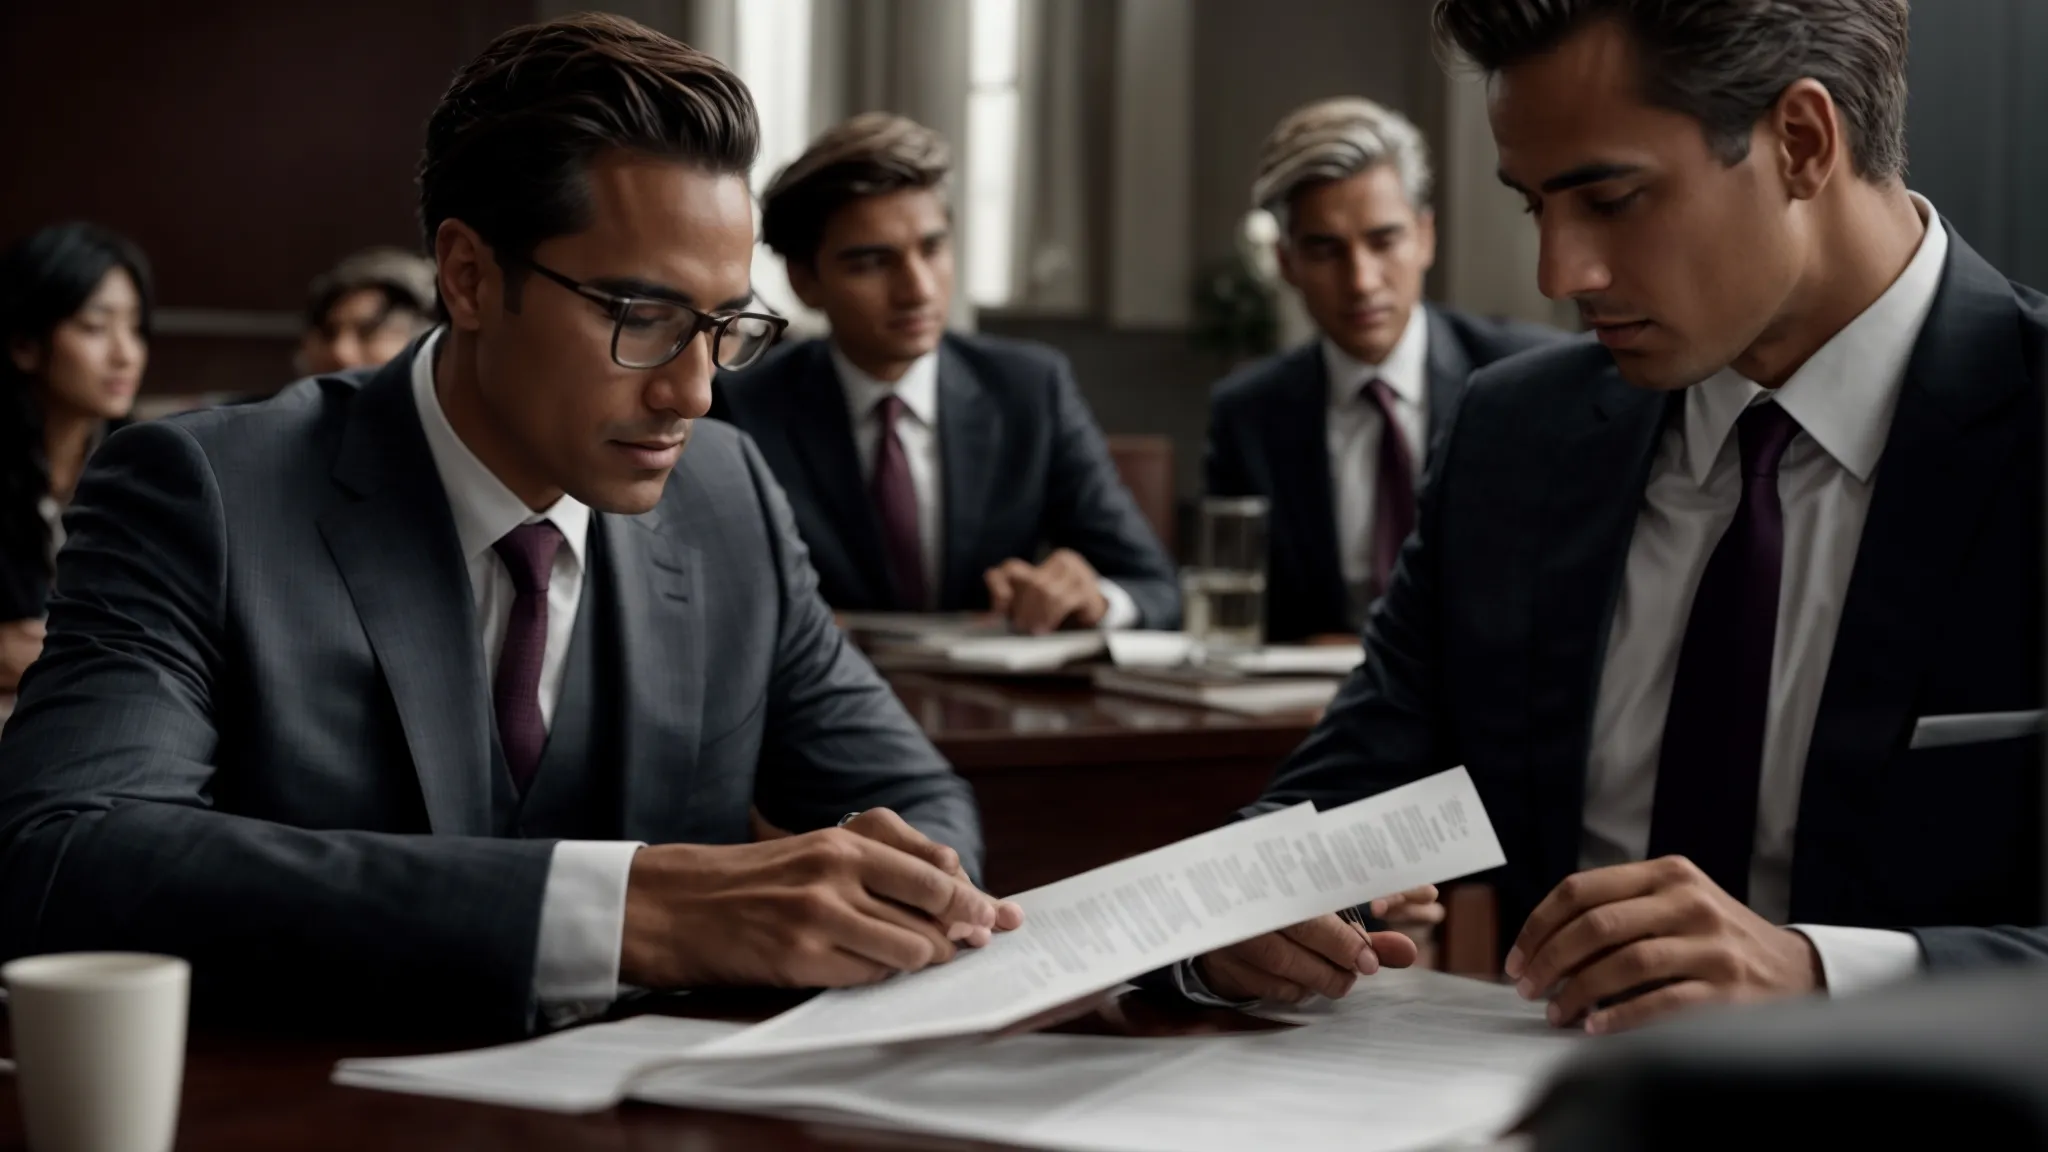 two professionals in suits engaging in a discussion across a table with a legal document spread out in front of them.